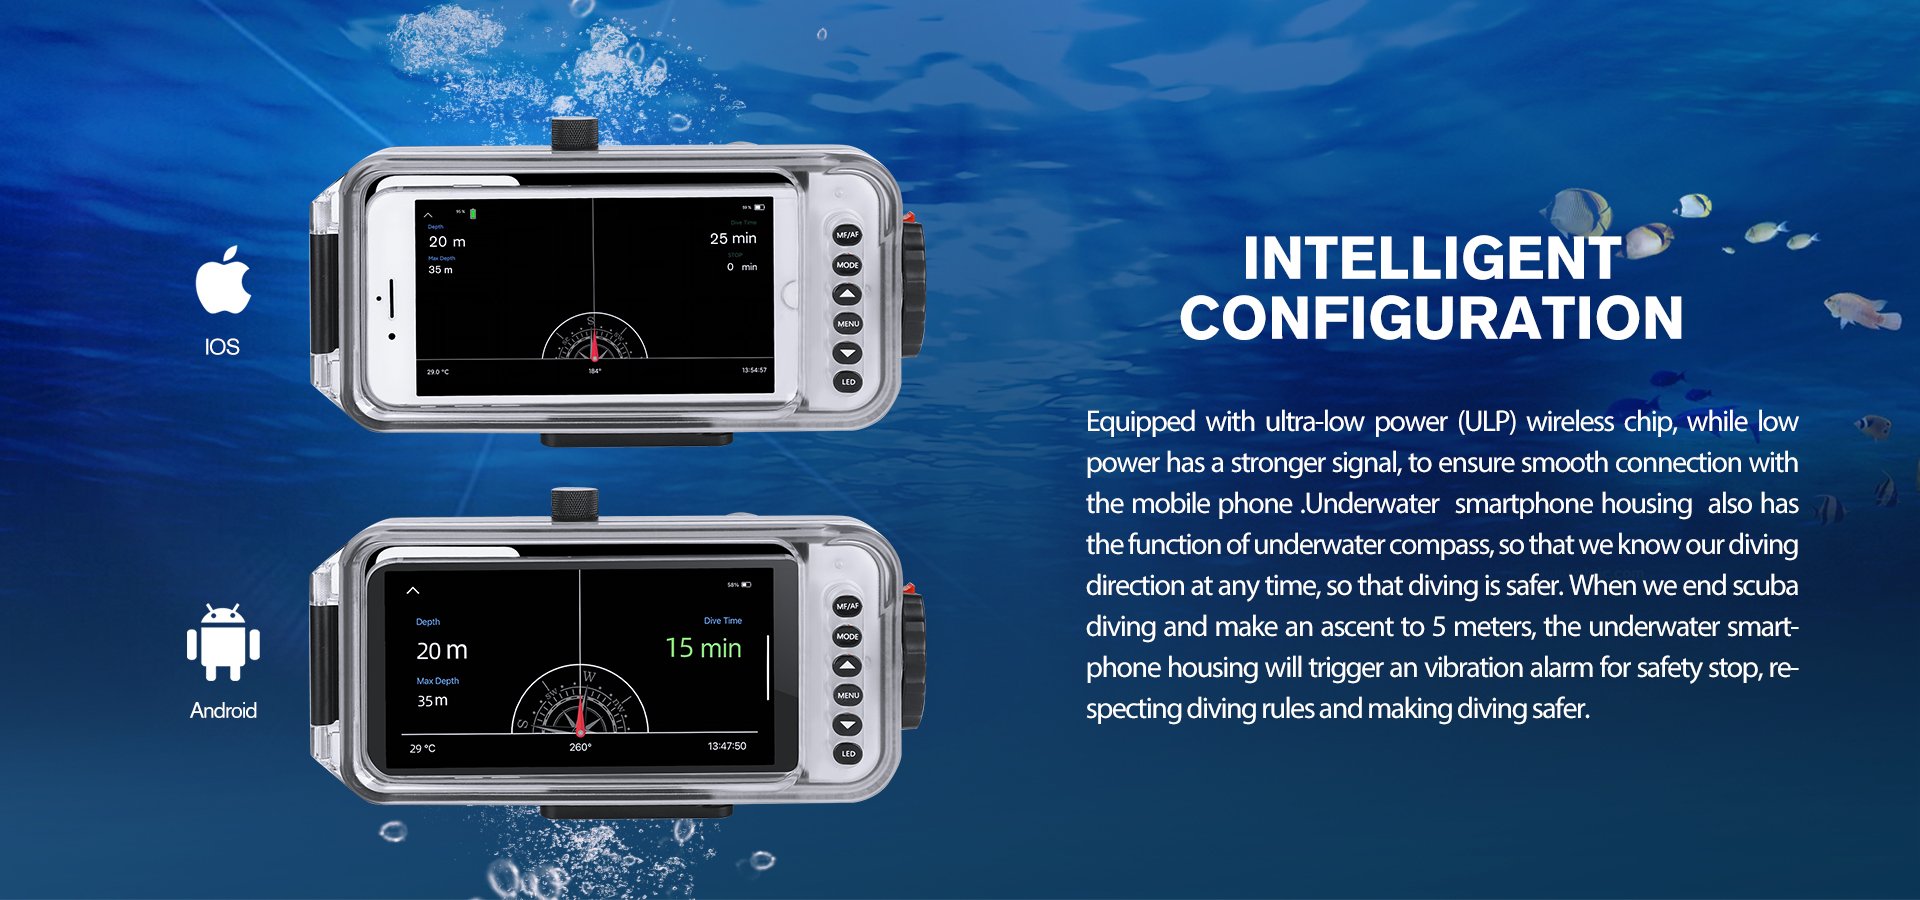 equipped with a depth sensor accurately monitors the depth and temperature data in real-time